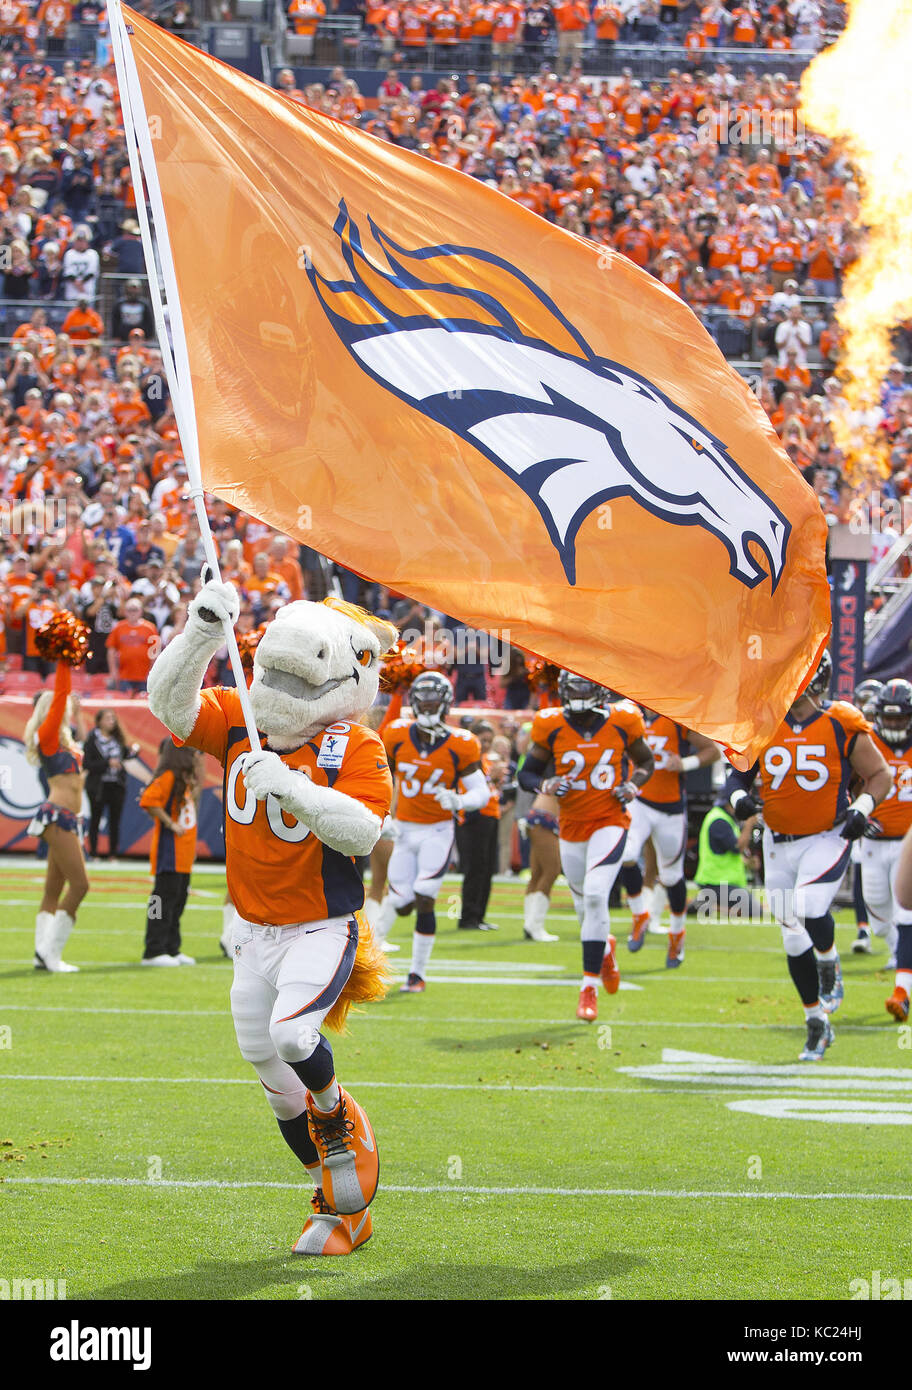 Denver, Colorado, USA. 1st Oct, 2017. Broncos Mascot Miles leads the Broncos team out during the start of the 1st. Half at Sports Authority Field at Mile High Sunday afternoon. Broncos beat the Raiders 16-10. Credit: Hector Acevedo/ZUMA Wire/Alamy Live News Stock Photo